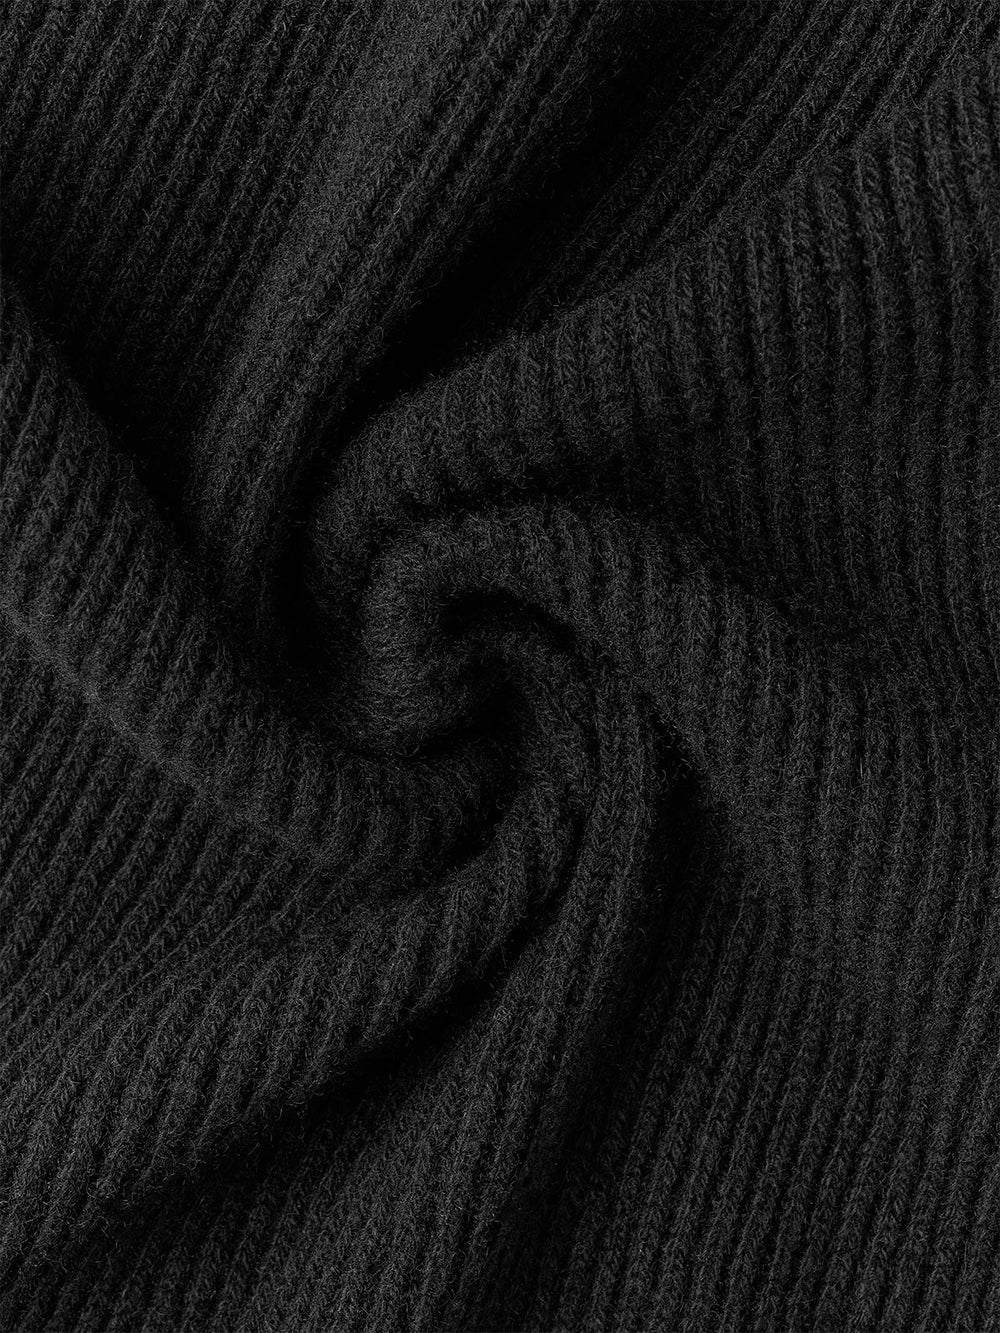 The Black Cashmere Scarf